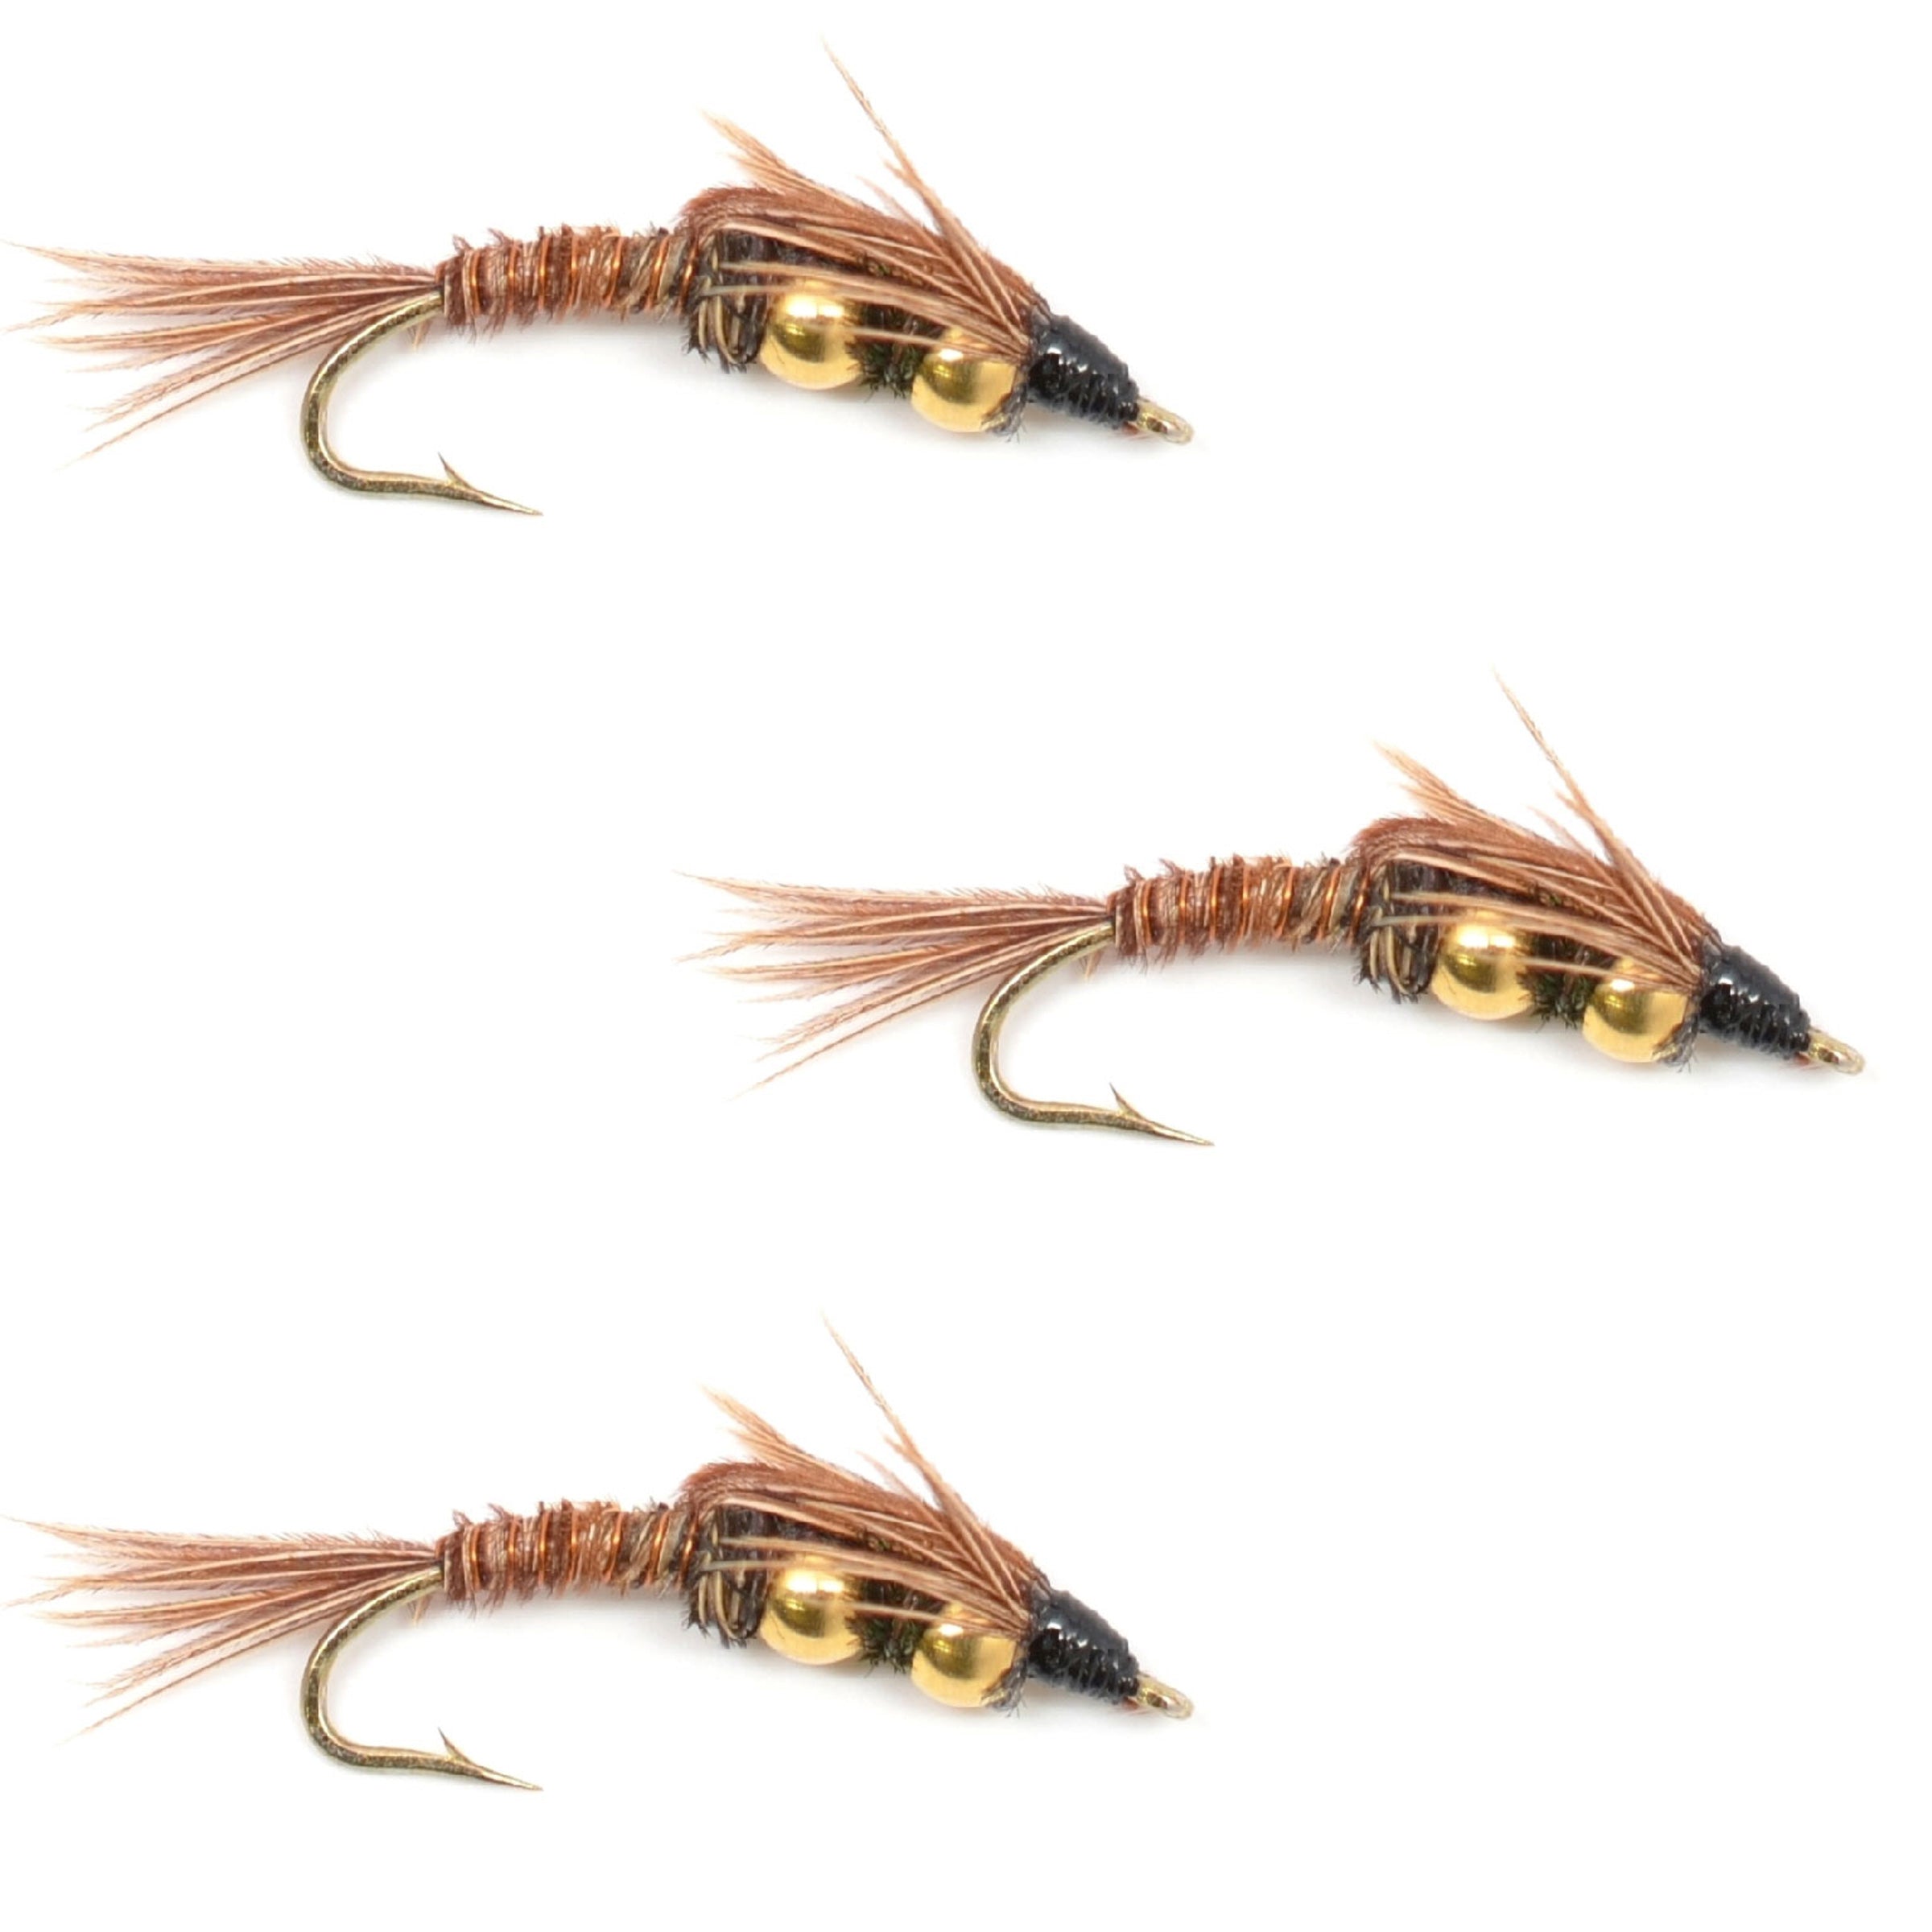 3 Pack Double Bead Pheasant Tail Nymph Fly Fishing Flies Hook Size 14